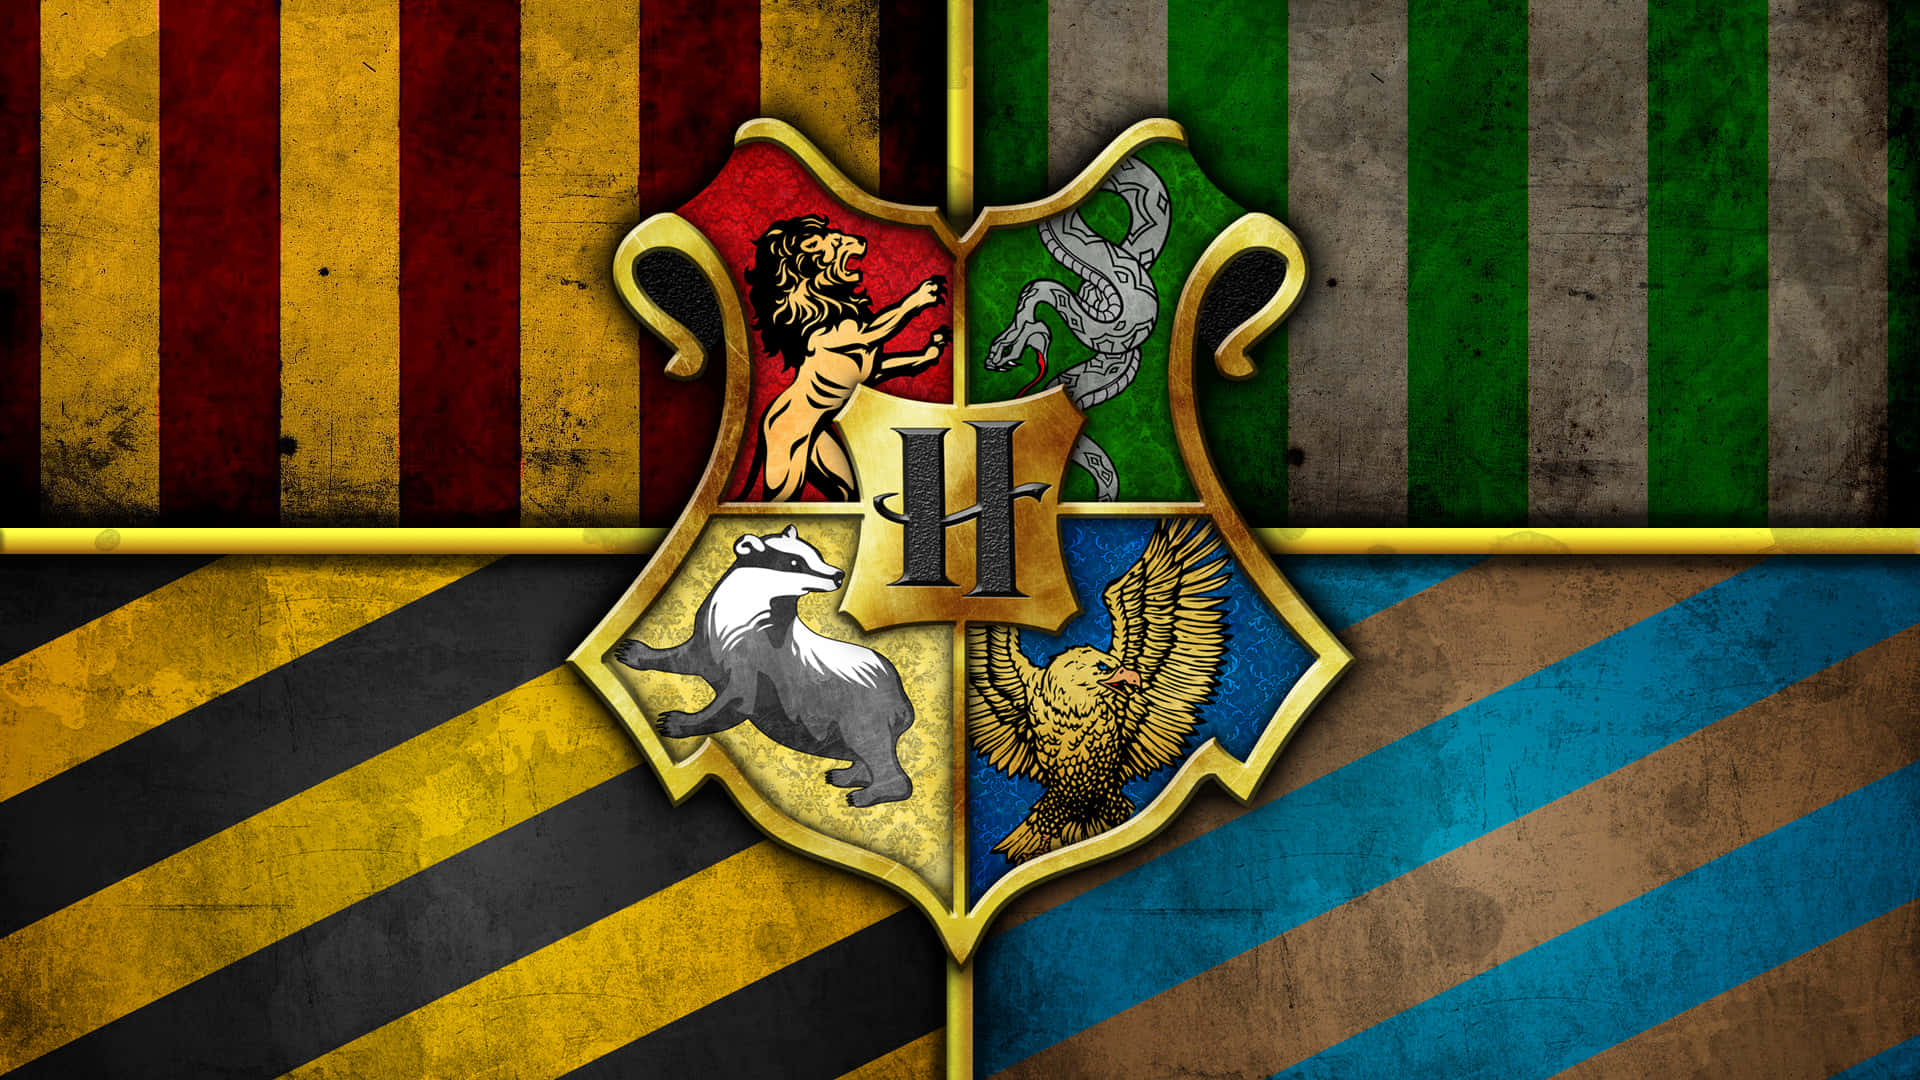 The Brave and Loyal Spirits of Gryffindor